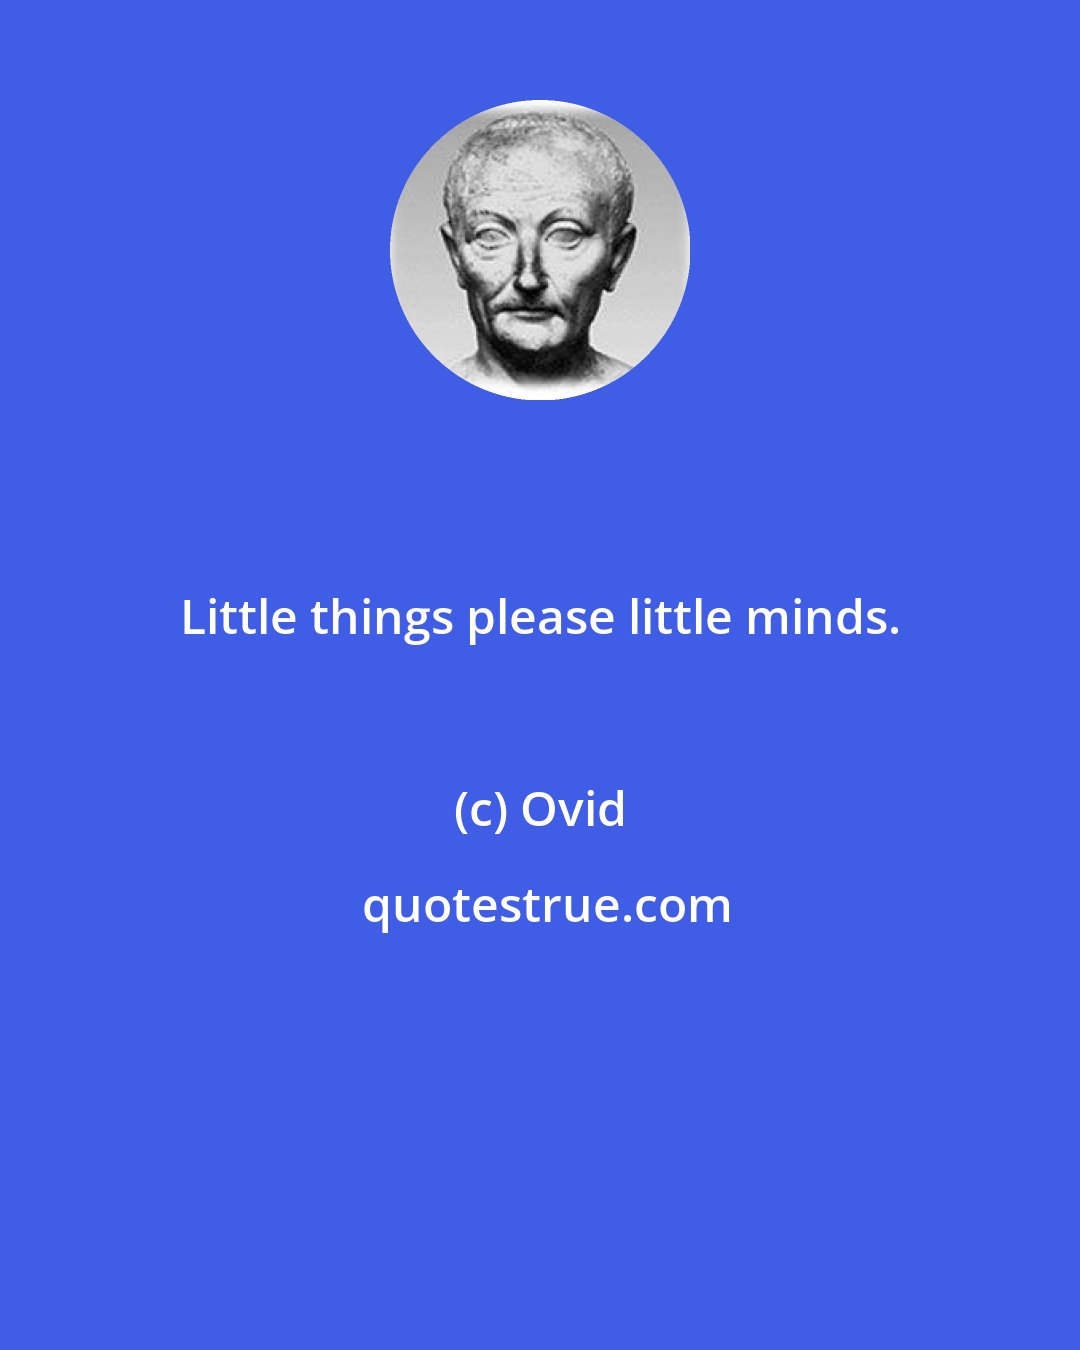 Ovid: Little things please little minds.